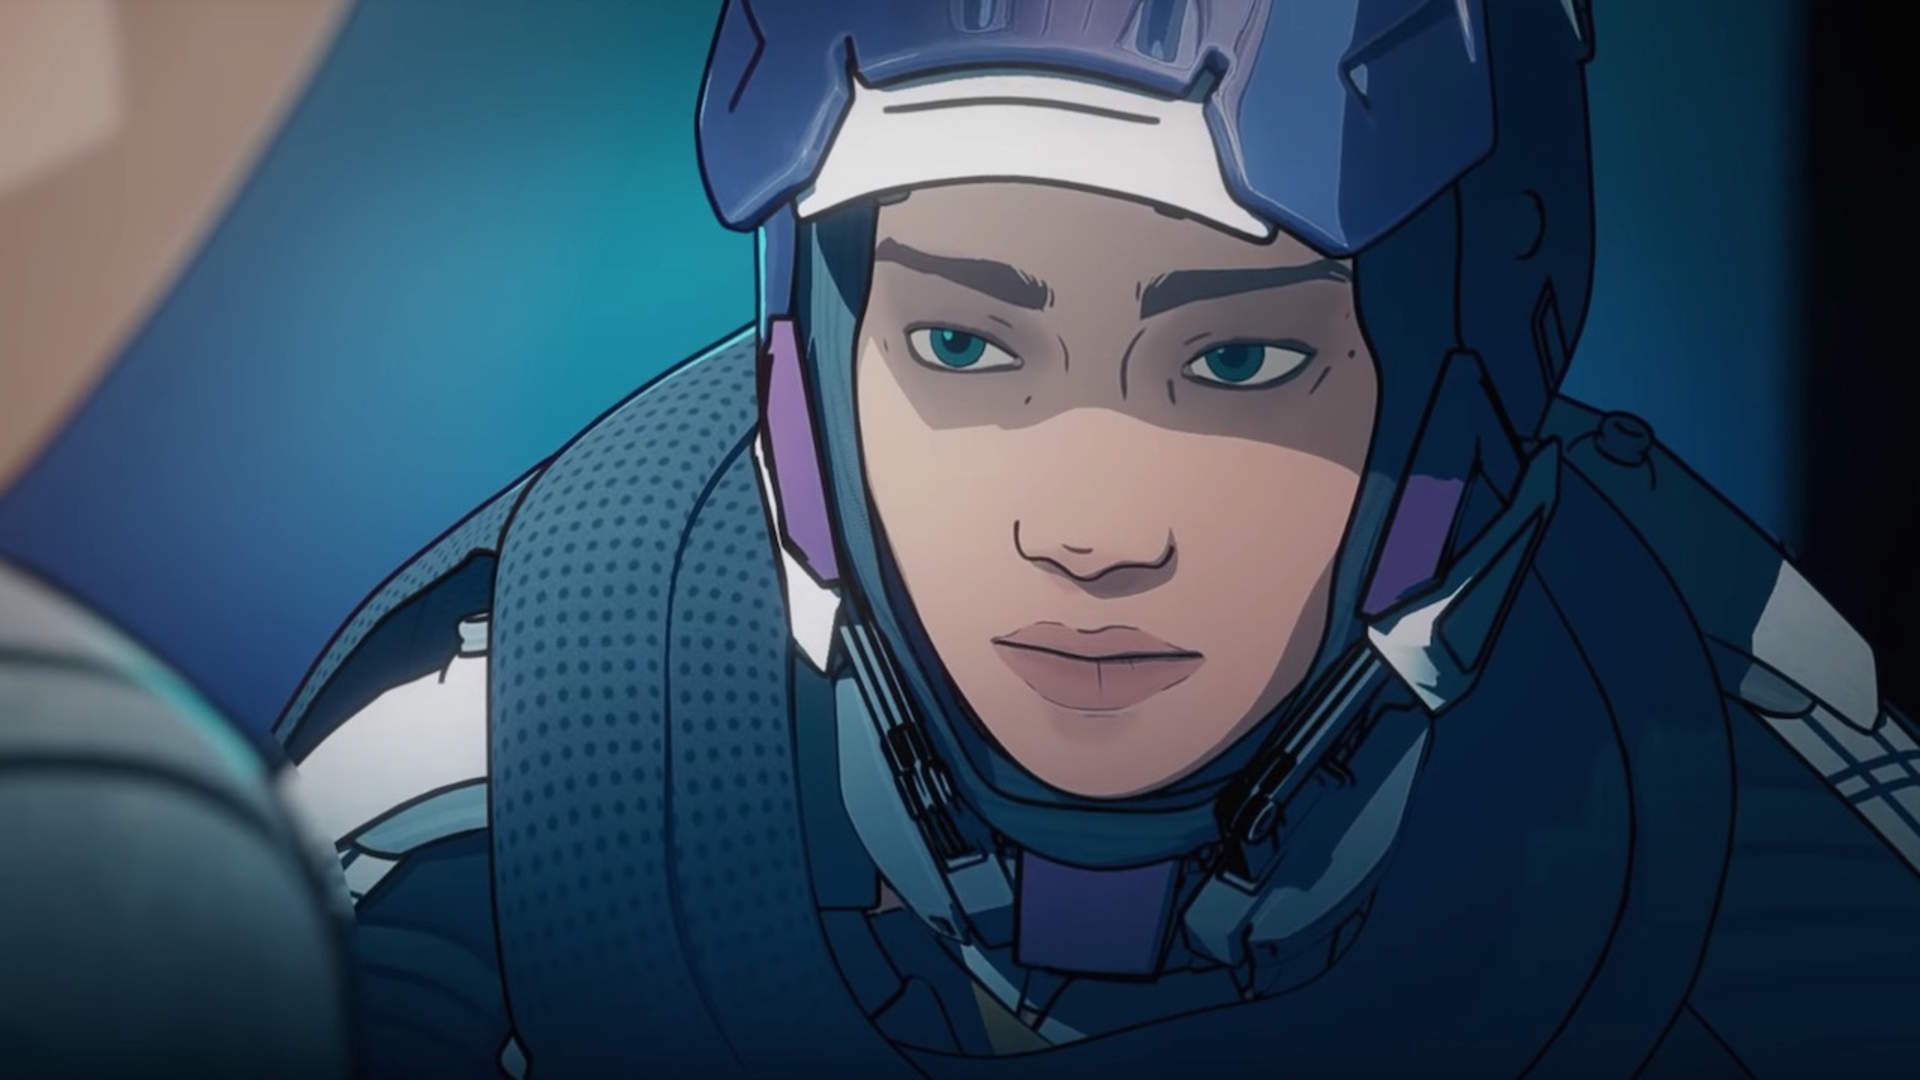 New Apex Legends Animated Short is Loaded With Lore From Titanfall